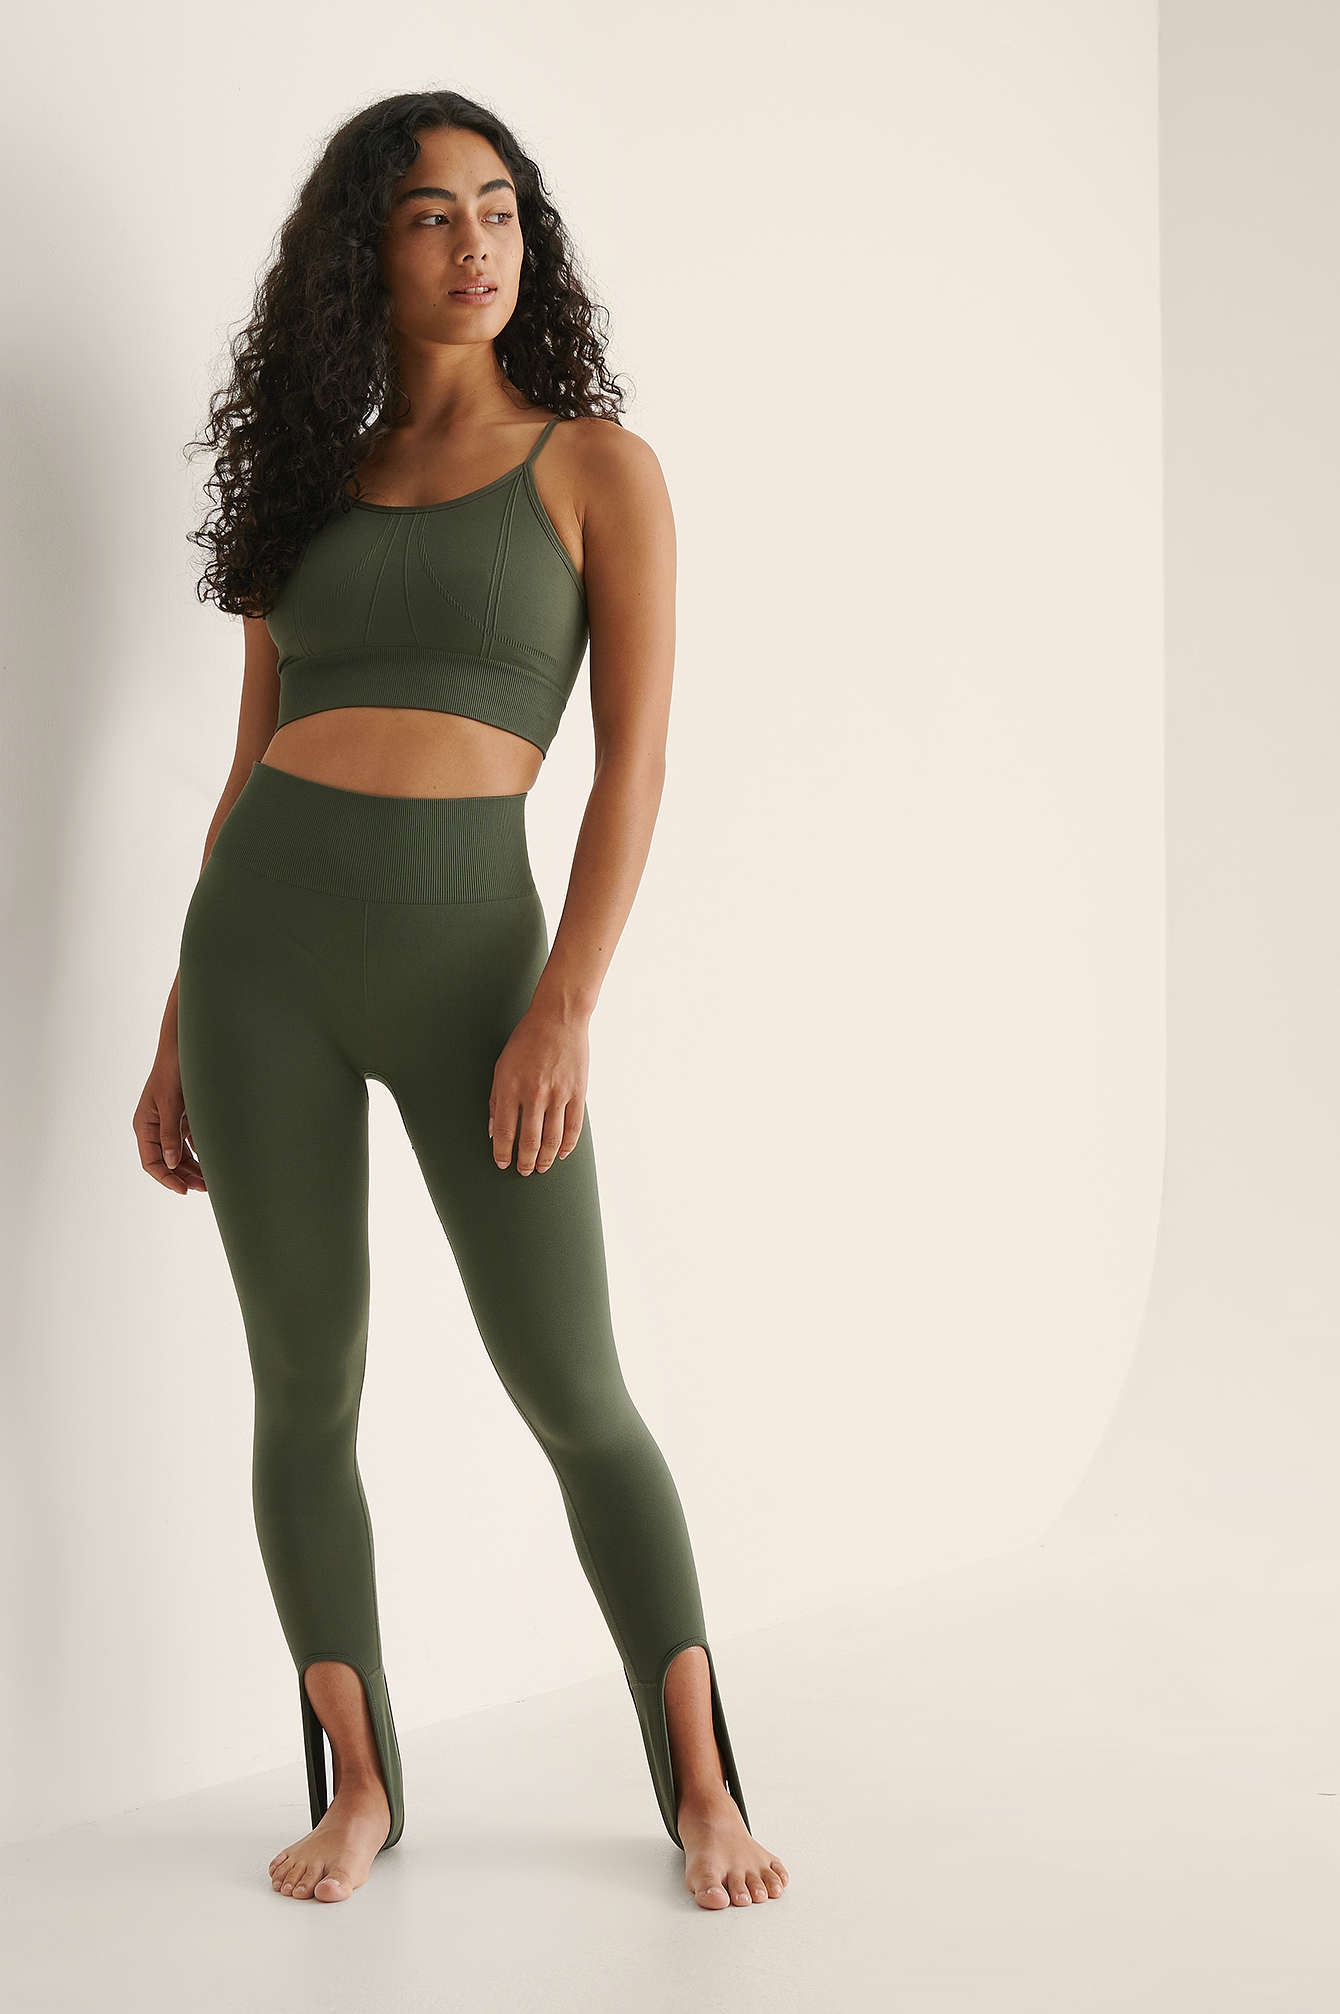 Seamless Stirrup Leggings Outfit.